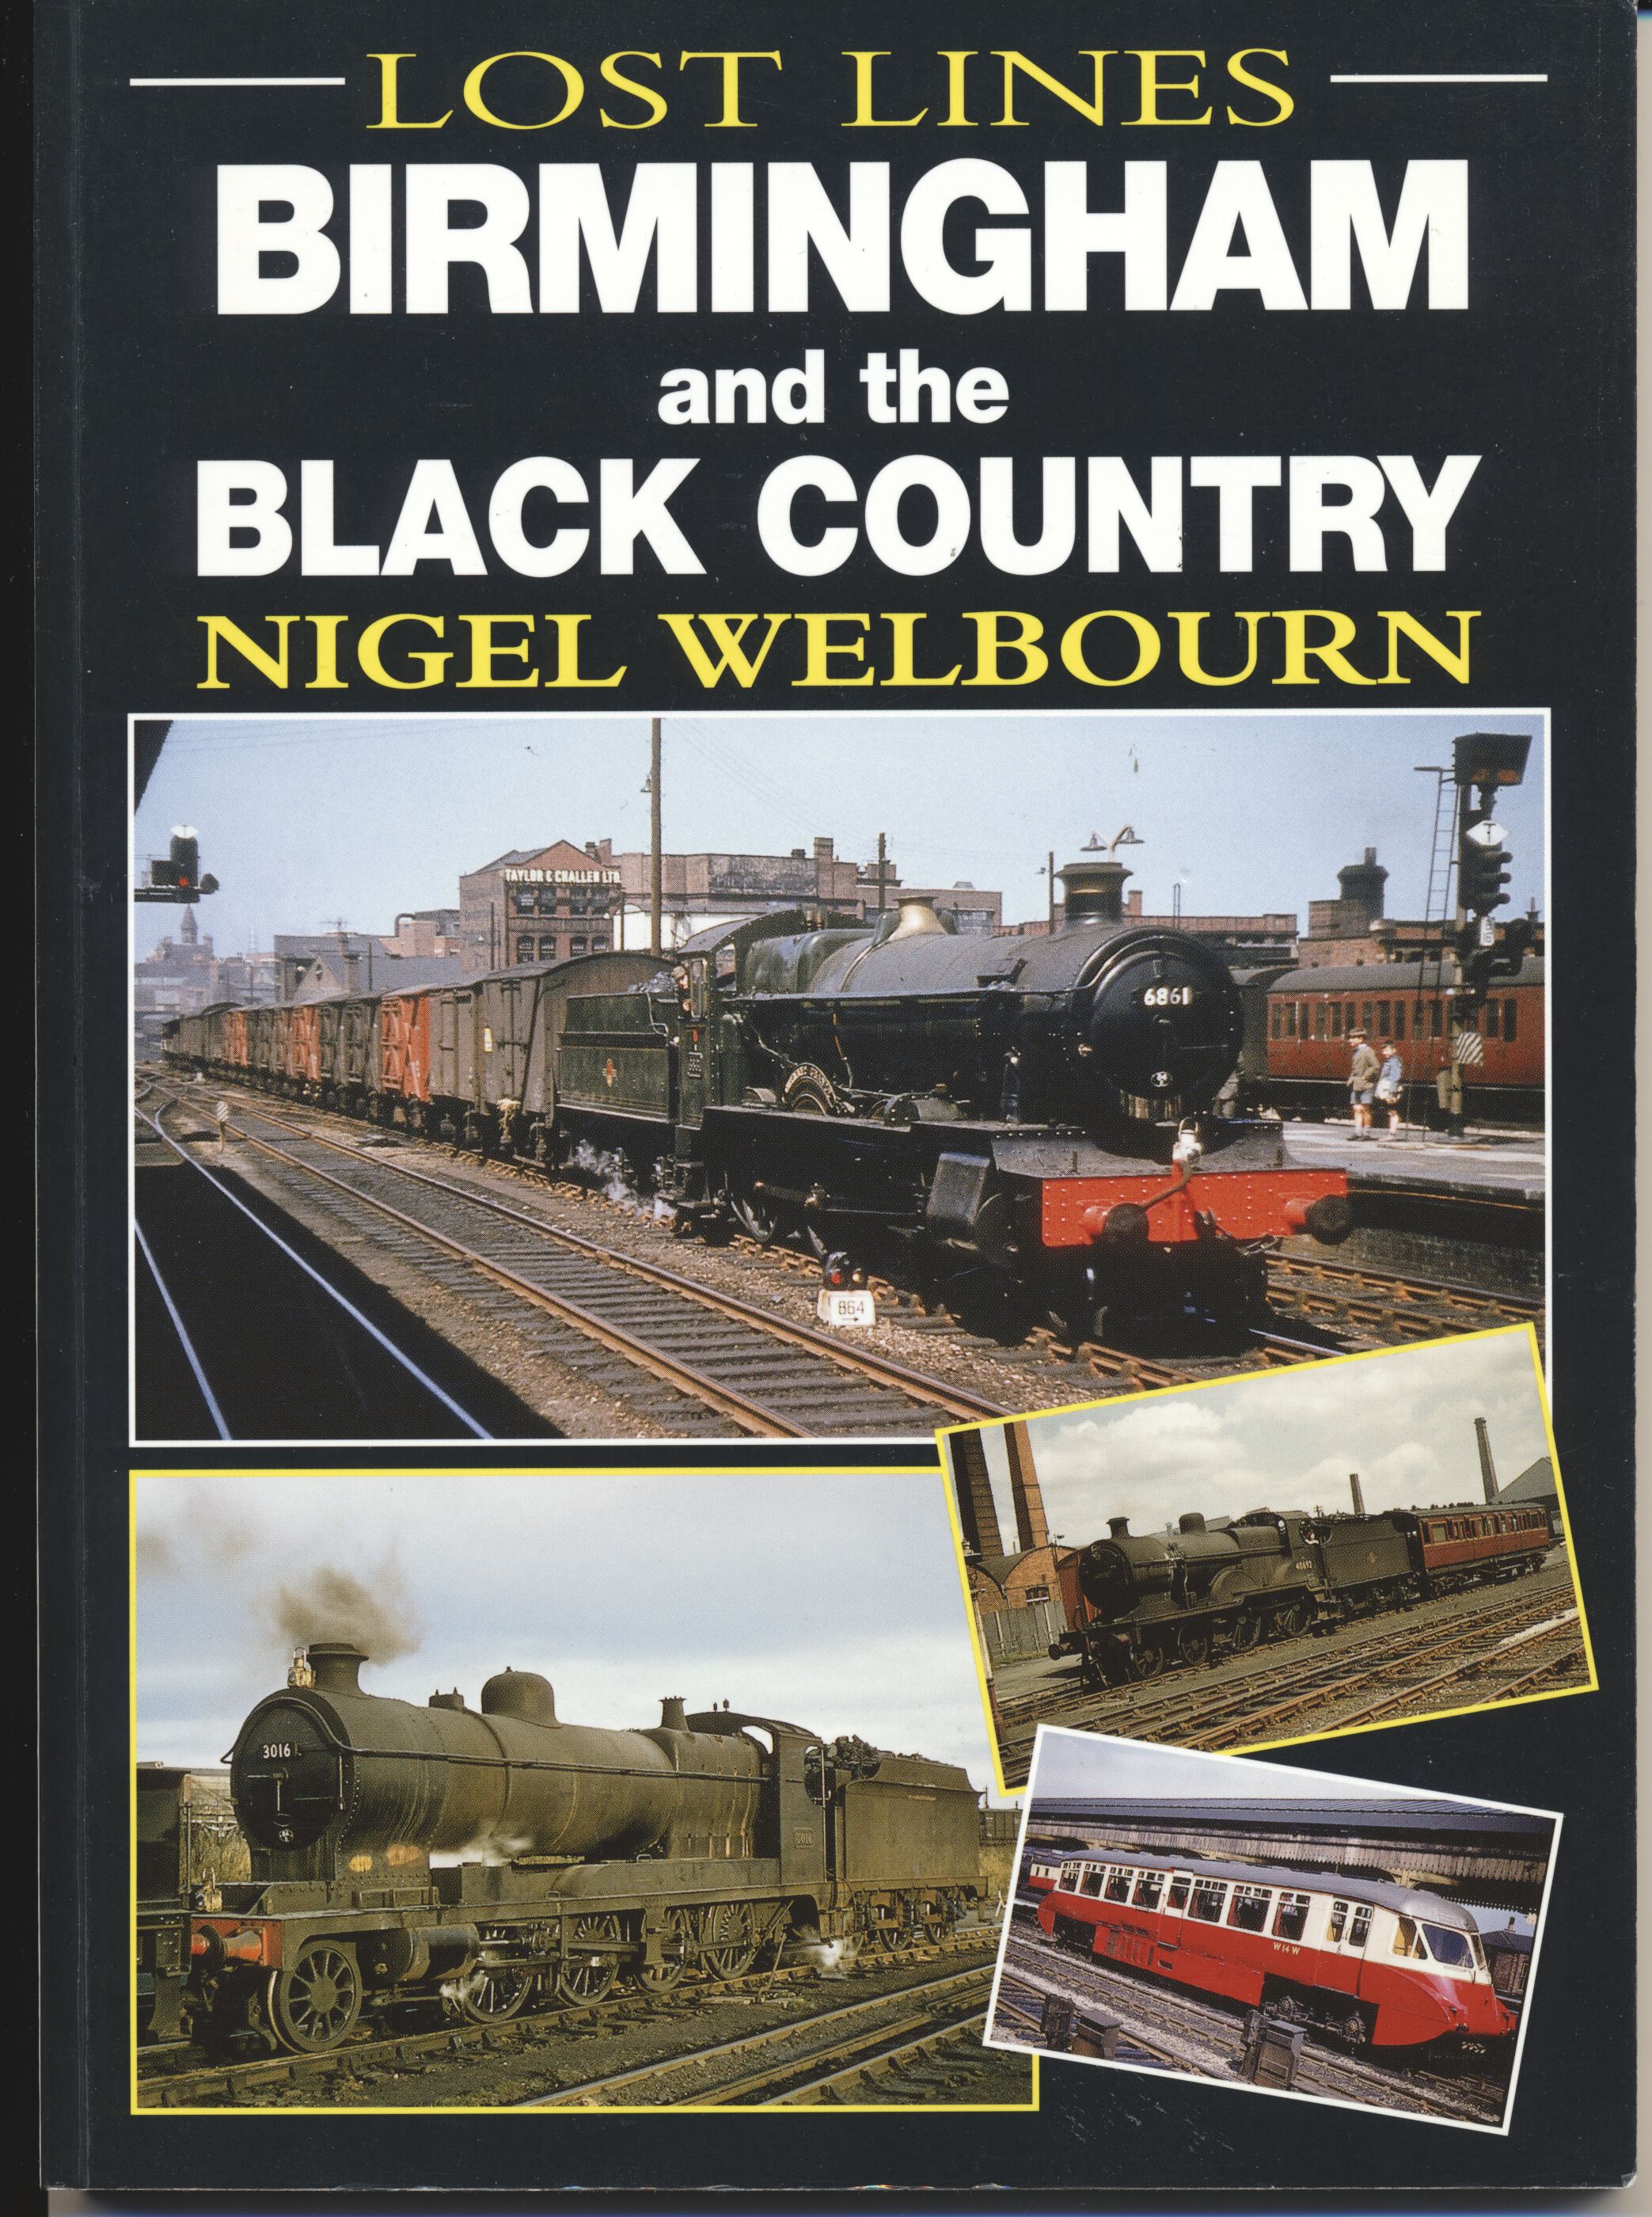 Lost Lines Birmingham and the Black Country - Nigel Welbourn